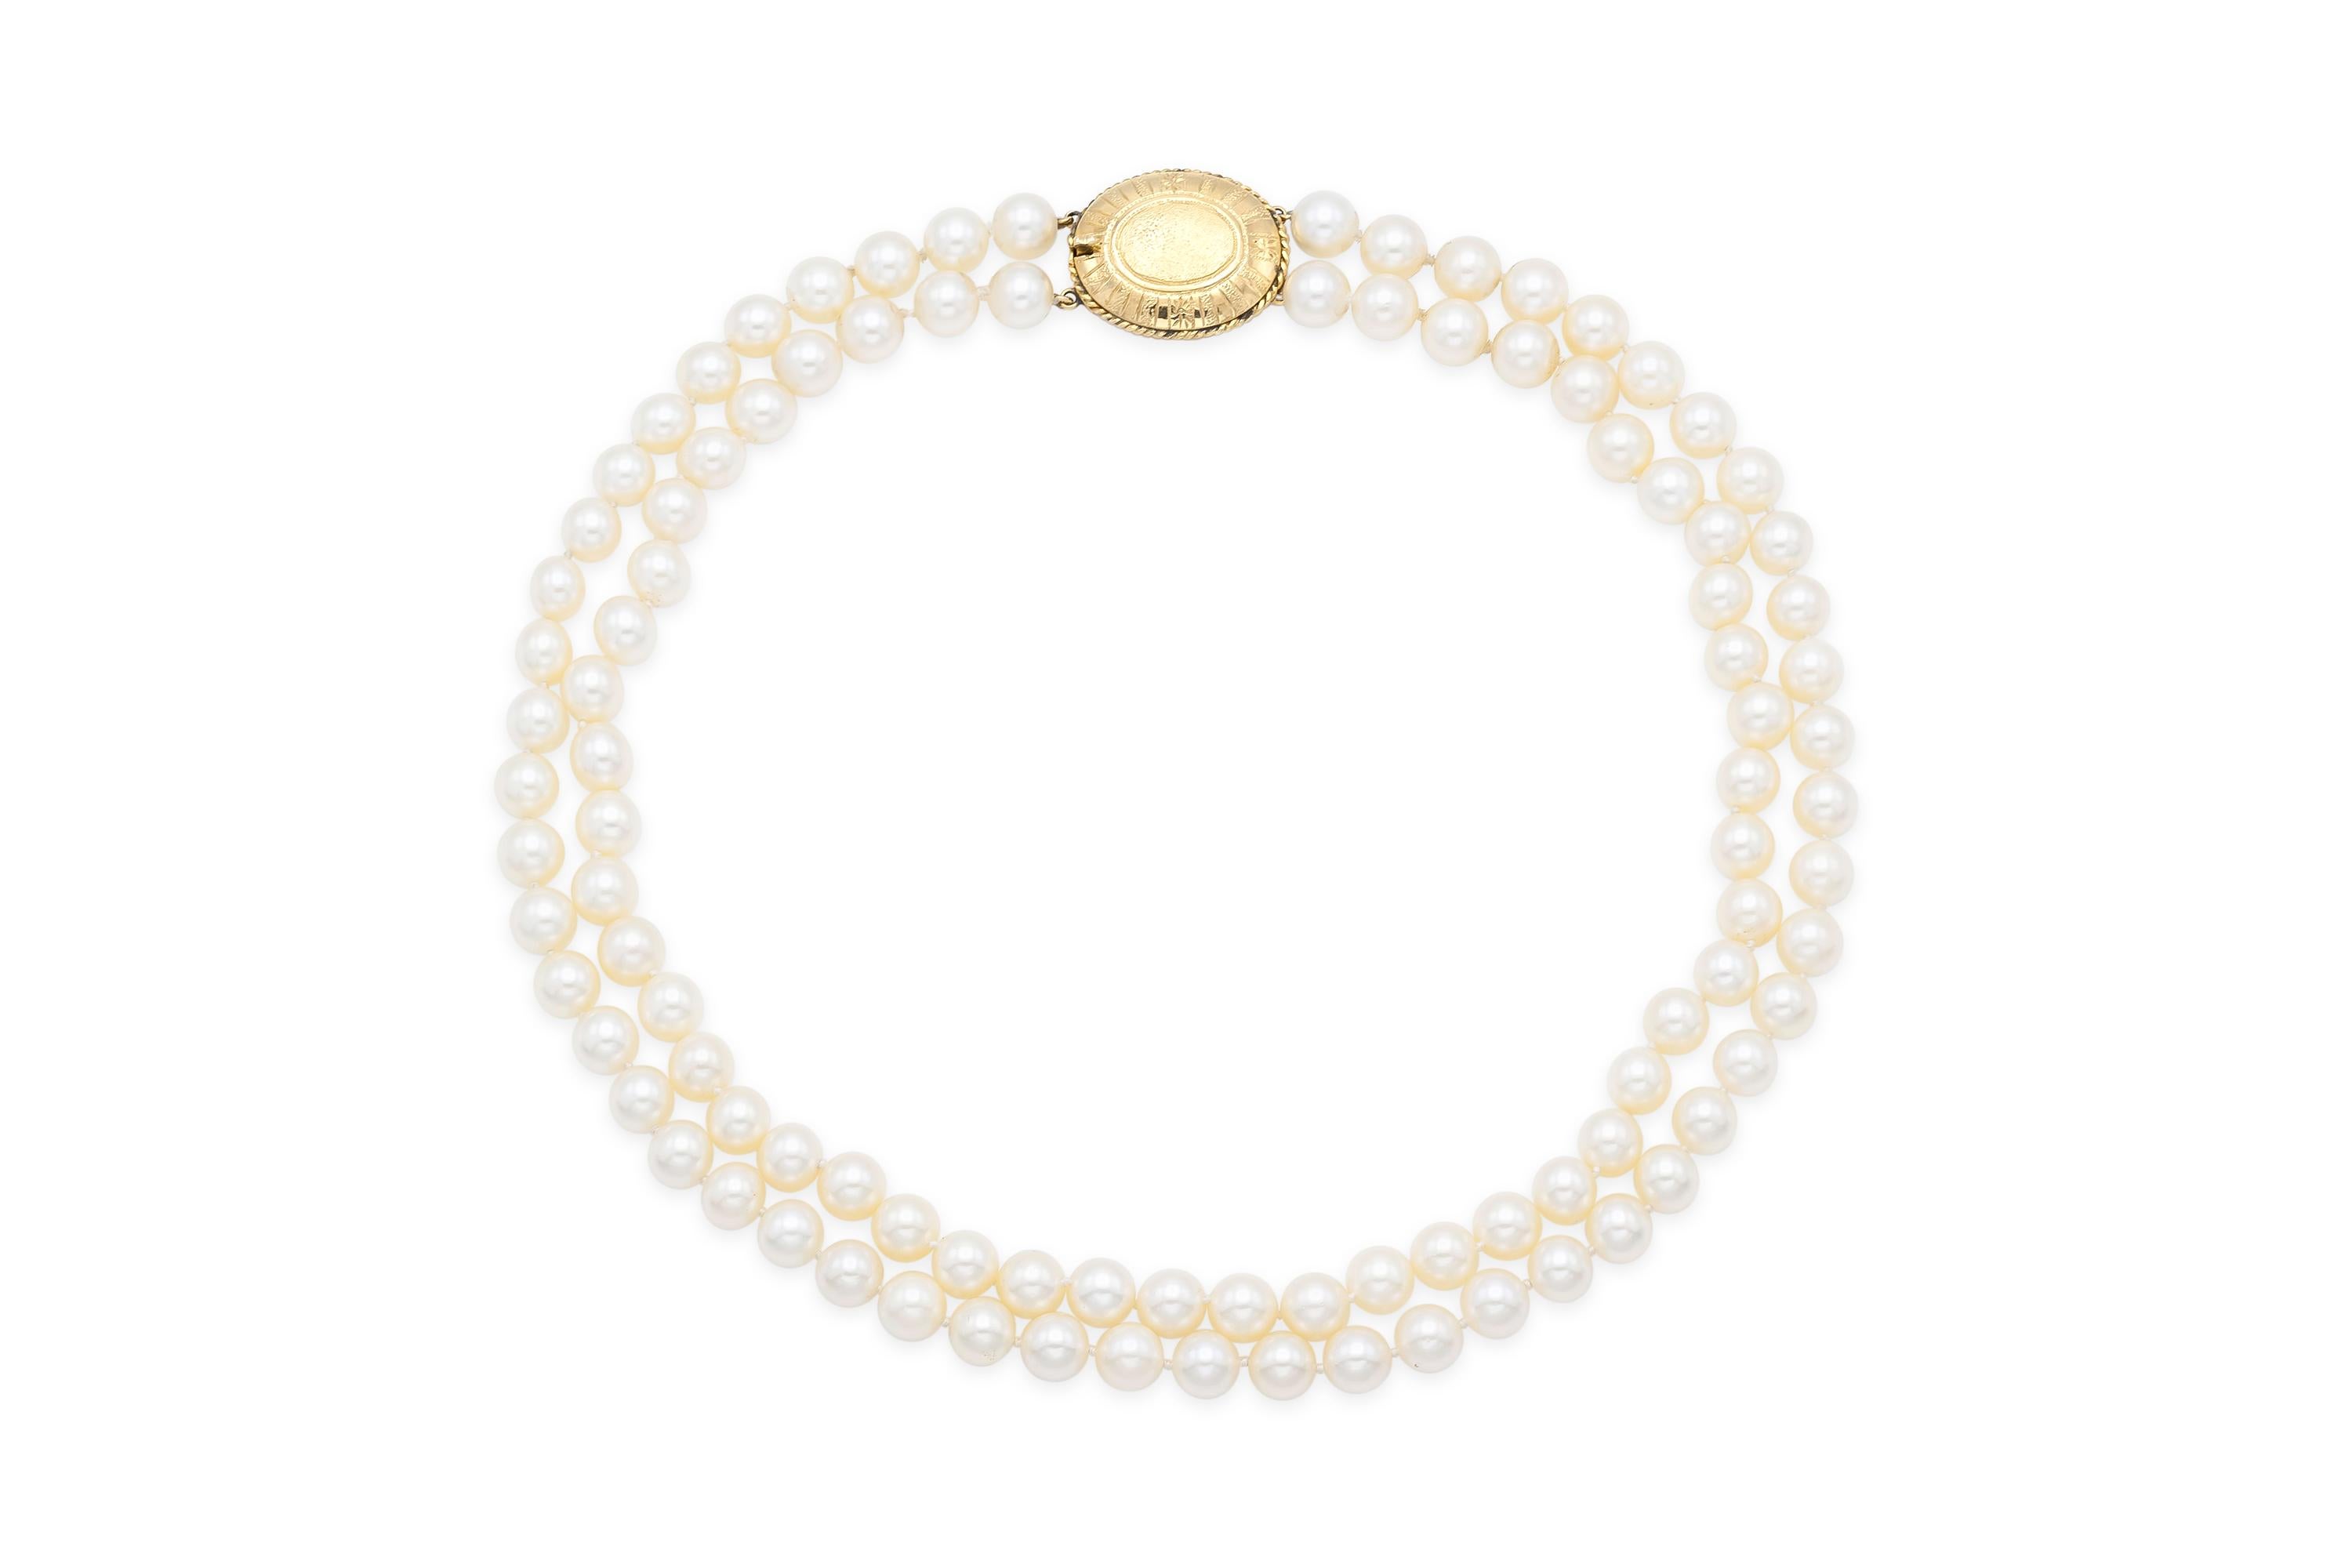 Finely strung with 100 pearls which measure 8 - 8 1/2 mm.
The clasp is finely crafted in 18k yellow gold.